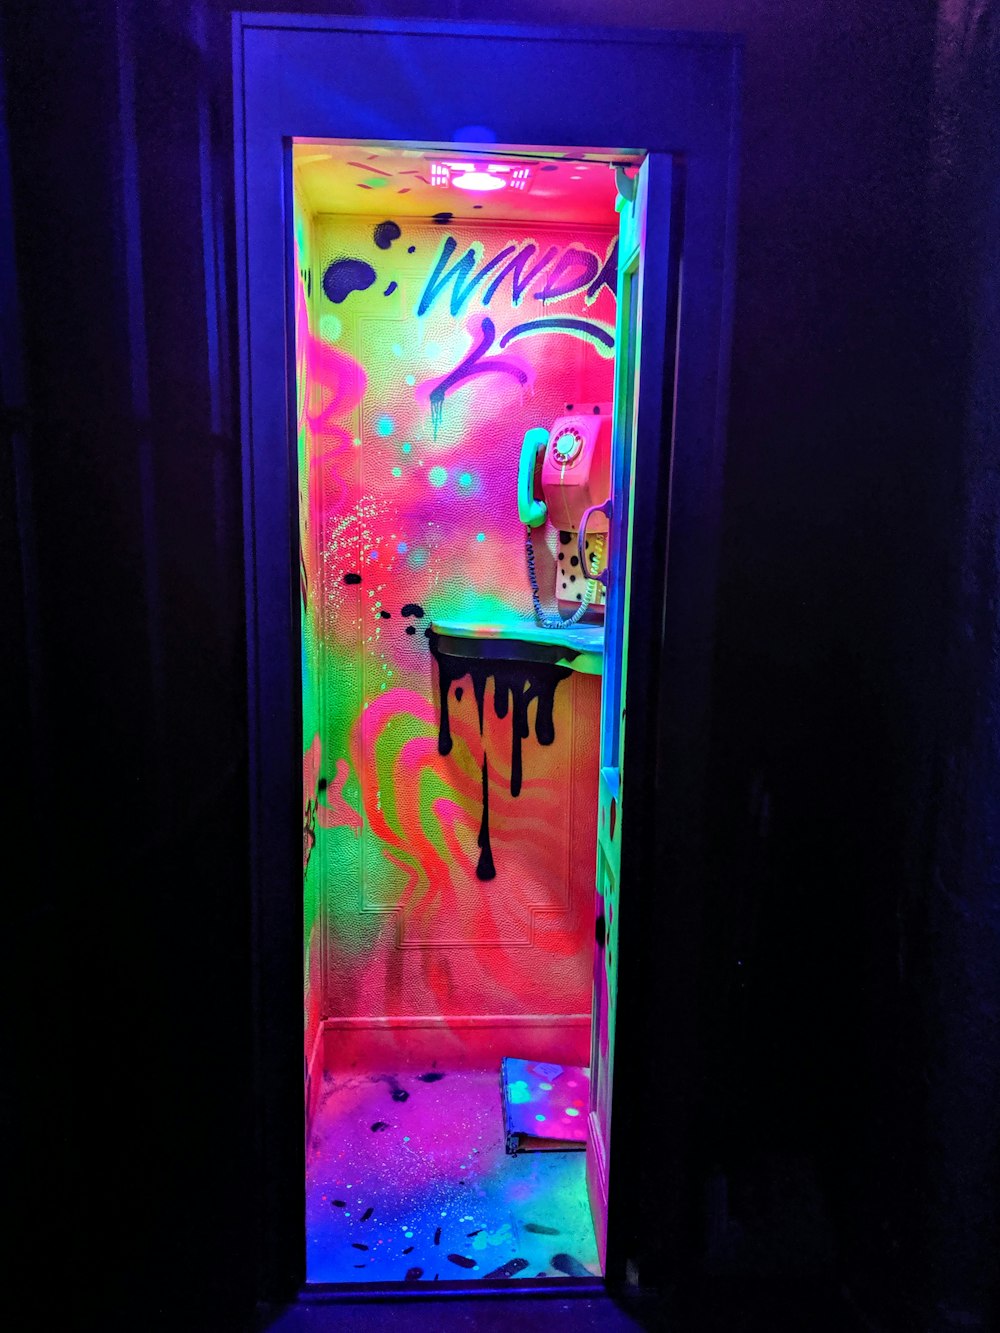 a brightly lit bathroom stall with graffiti on the walls